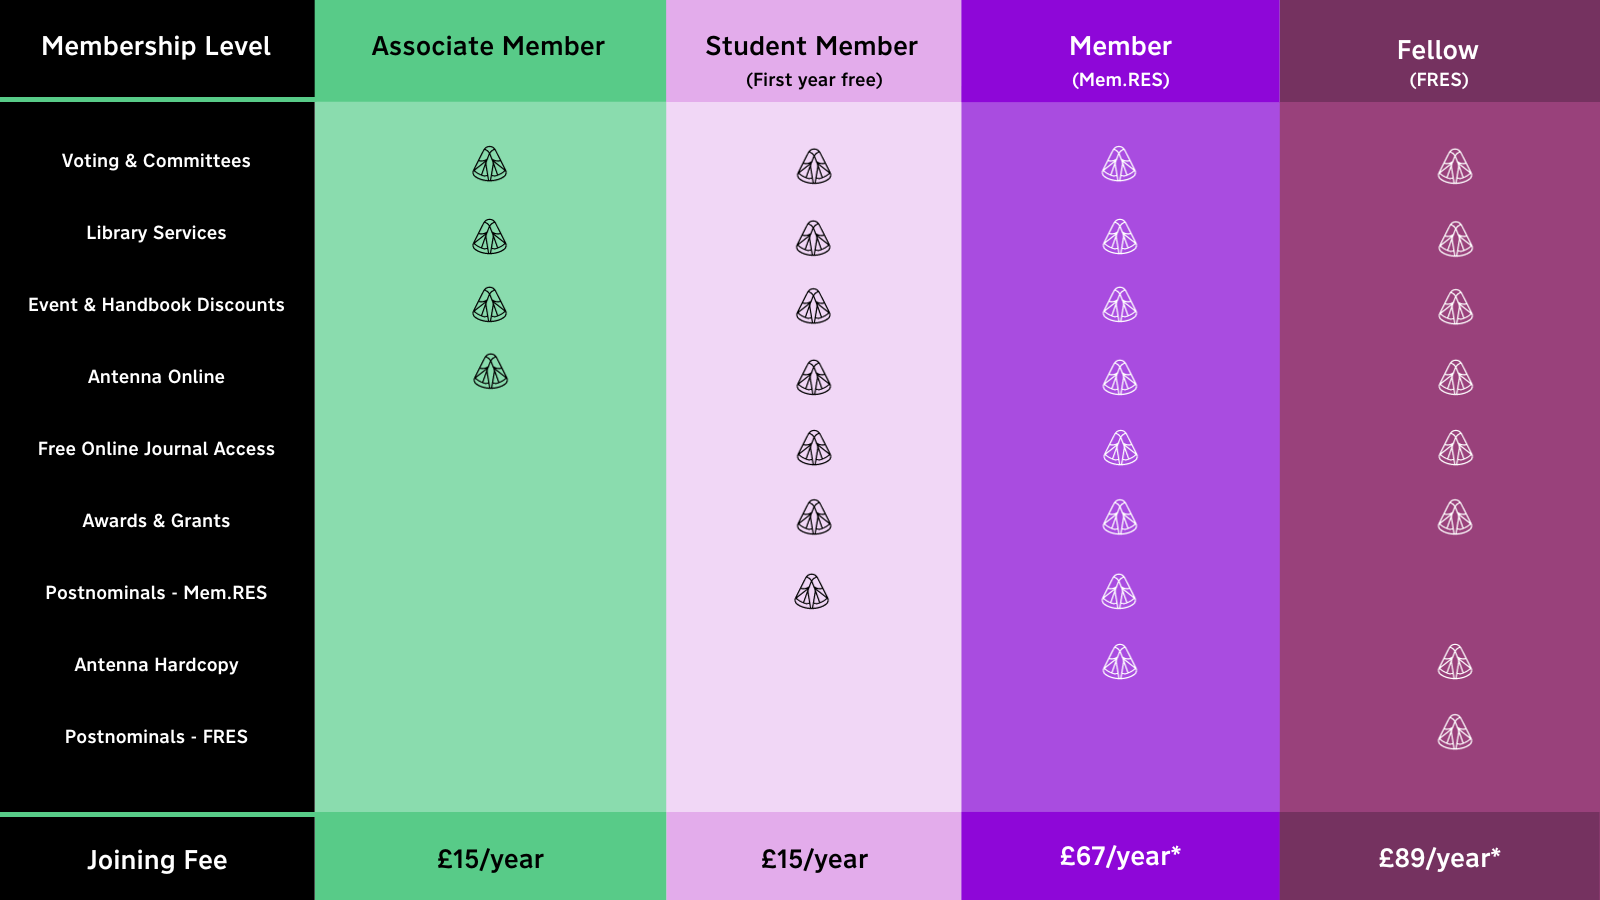 Membership benefits by level. Choose the membership type that's right for you.